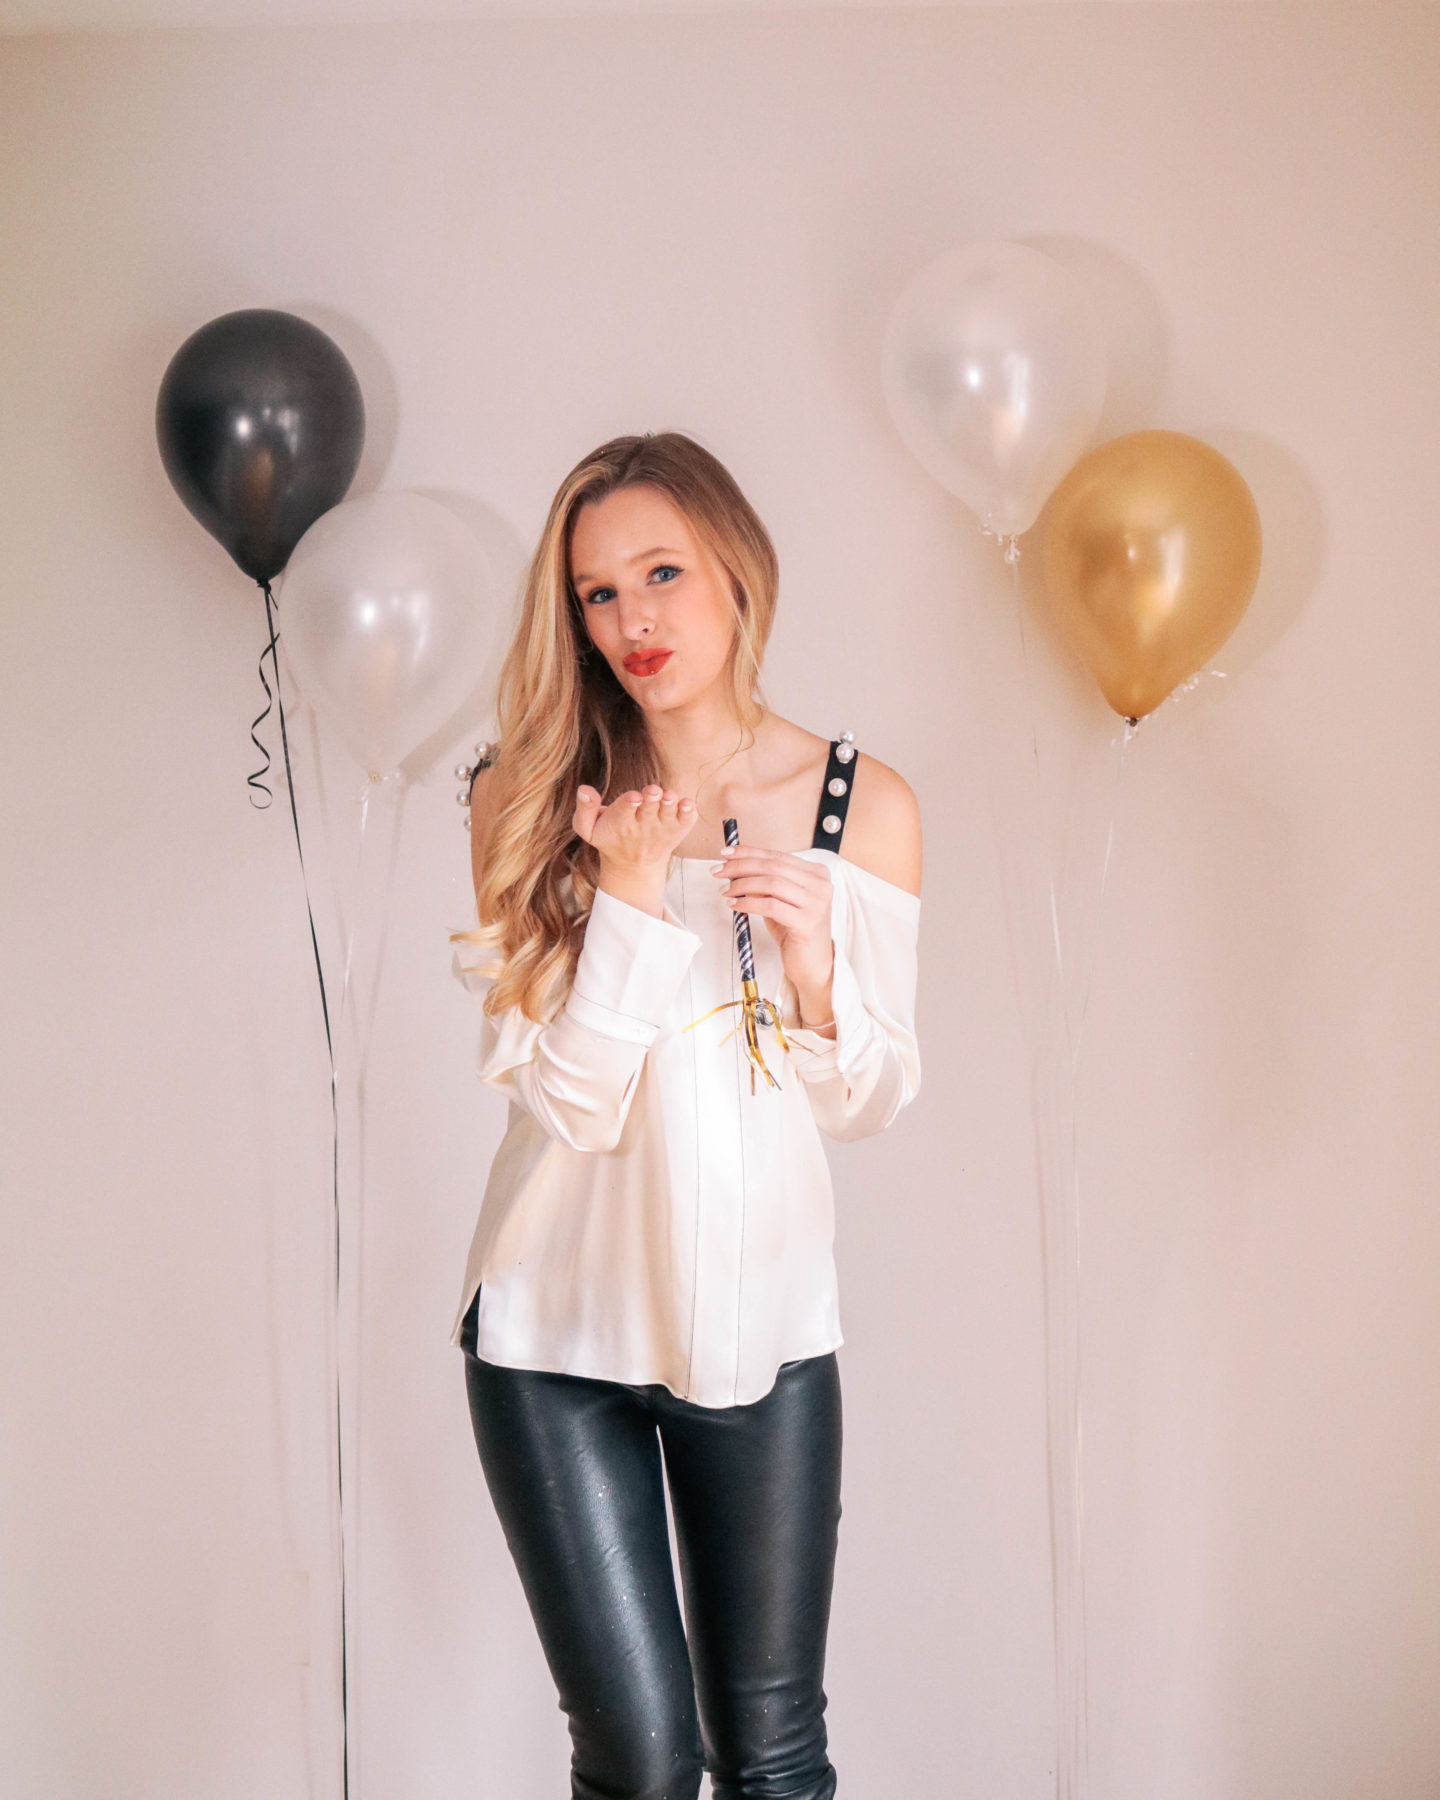 Fashion blogger, Leigha Gardner, of The Lilac Press sharing some designer looks for NYE including this embellished 3.1 Phillip Lim top and Stella McCartney faux leather leggings.